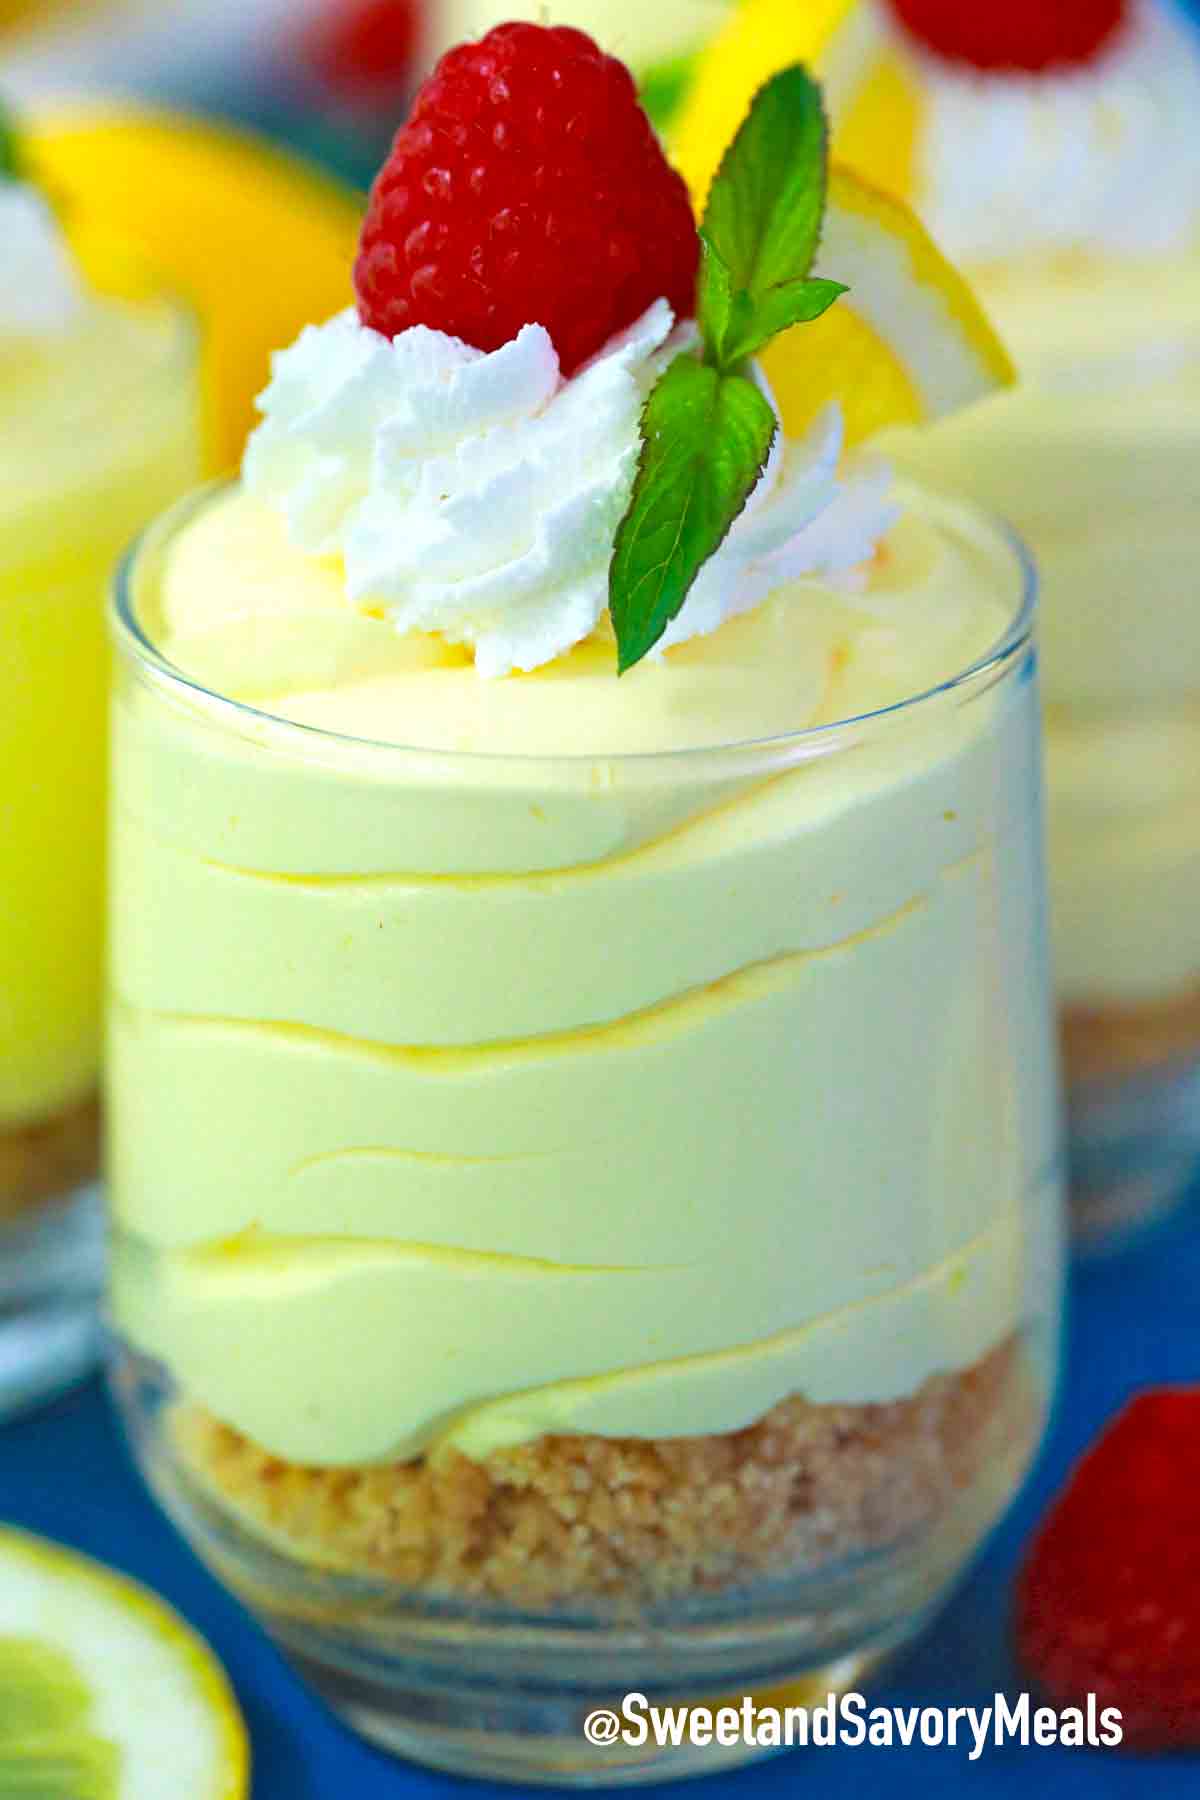 Lemon Mousse Recipe [Video] - Sweet and Savory Meals